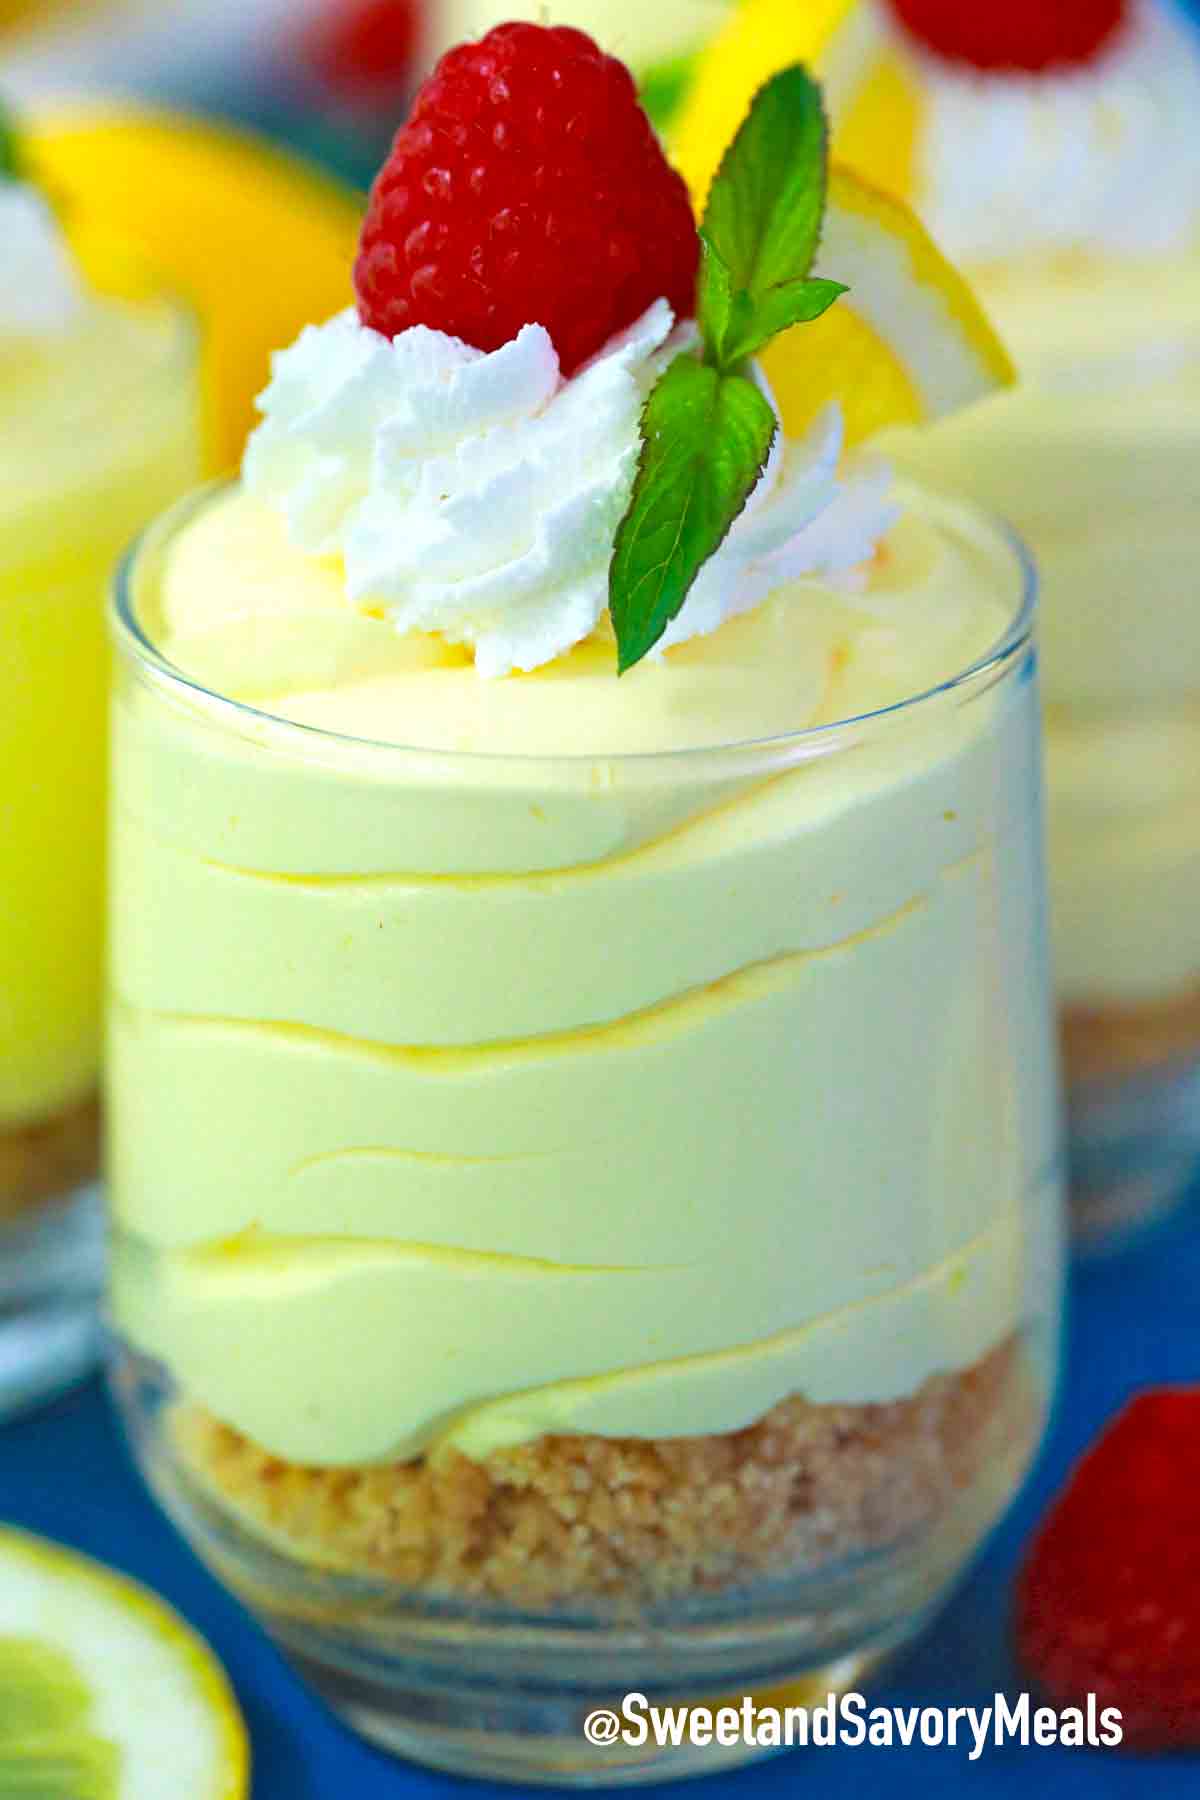 Lemon Mousse Recipe [Video] - Sweet and Savory Meals